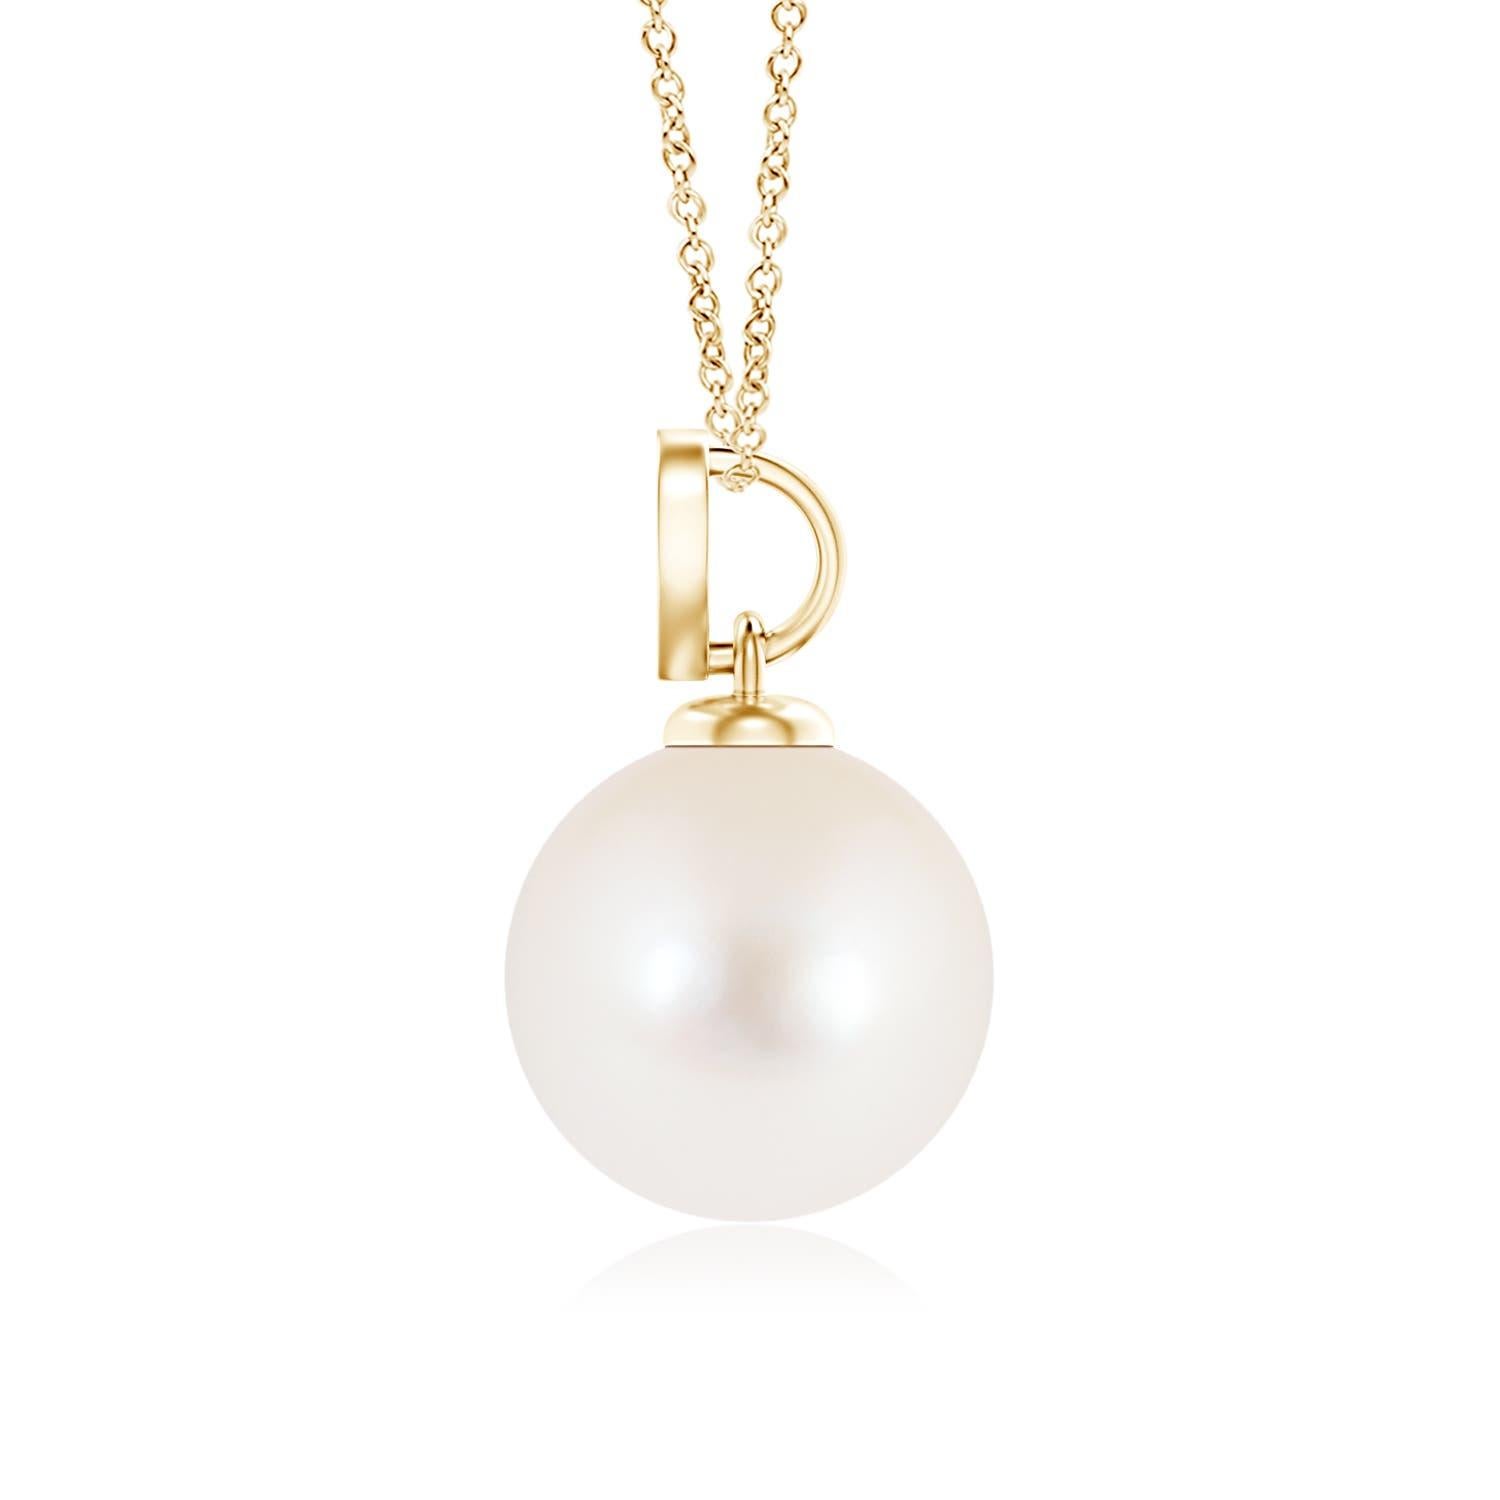 Nothing connotes love better than this charming diamond heart pendant in 14K yellow gold. It features a round Freshwater cultured pearl that illuminates with its delightful hue, while the diamond studded heart motif adds a romantic touch to the